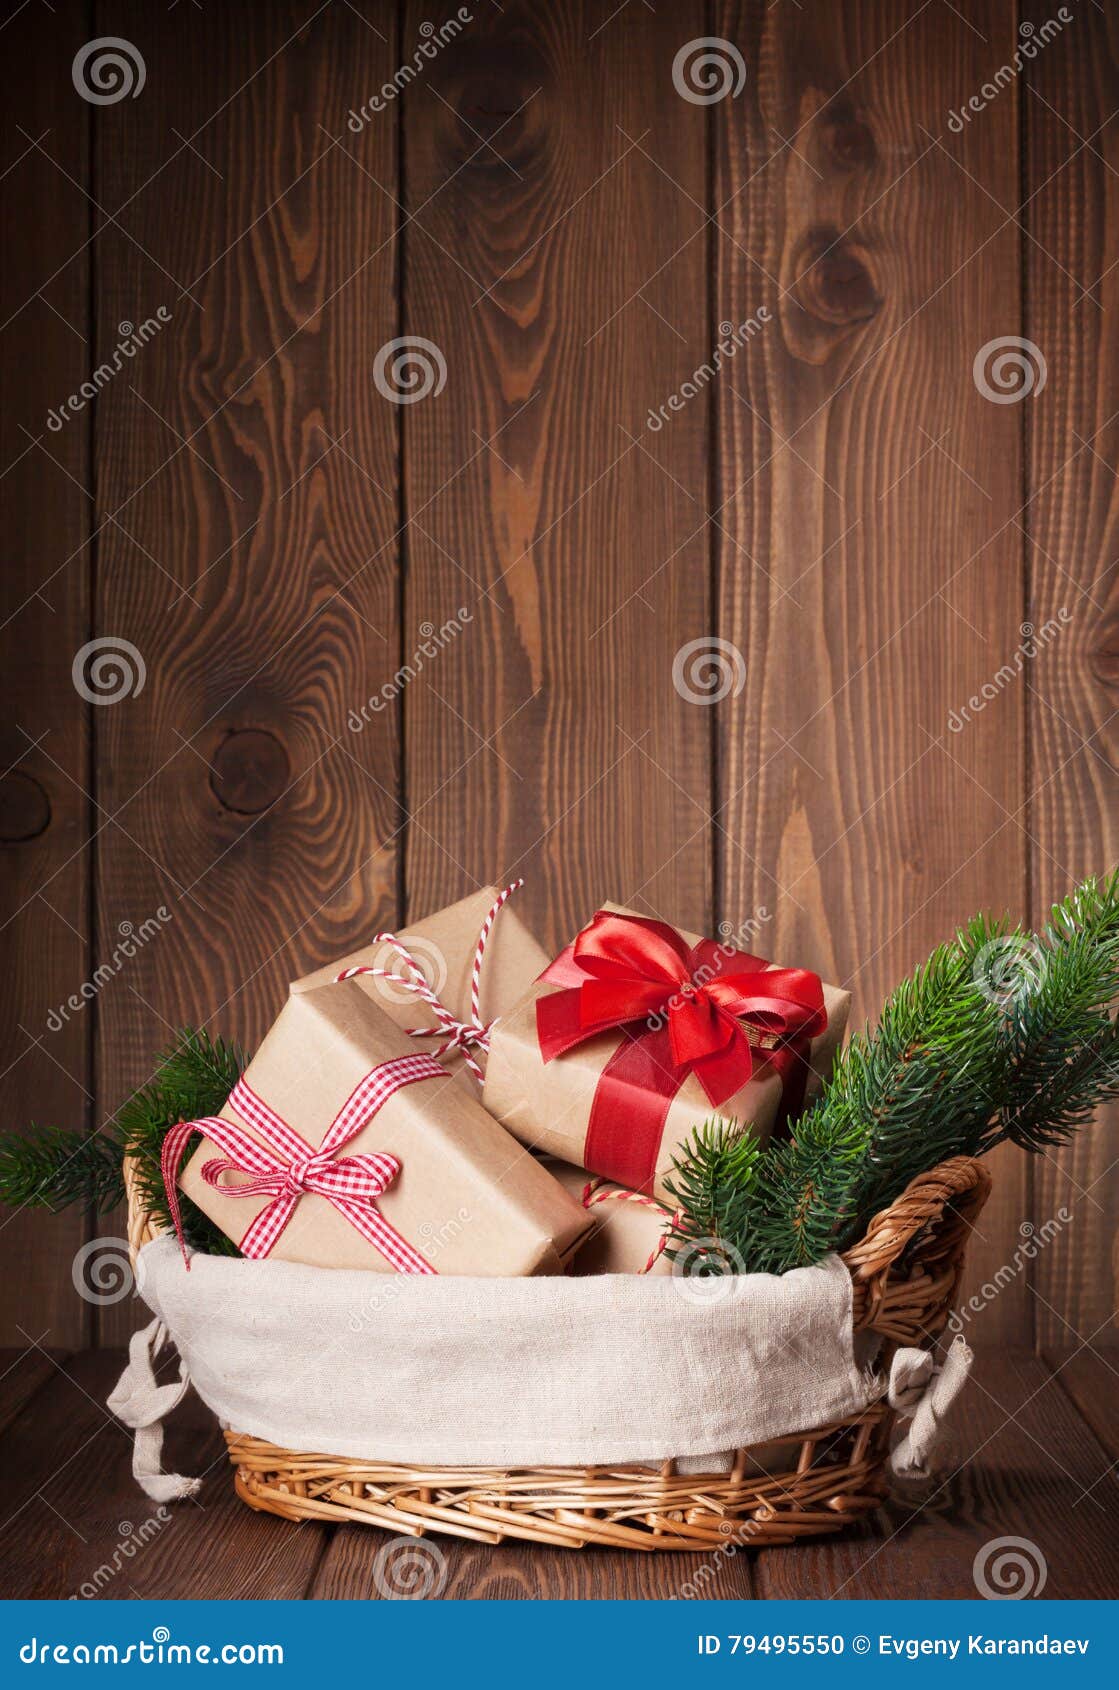 Christmas Gifts and Tree Branch Stock Photo - Image of midnight, retro ...